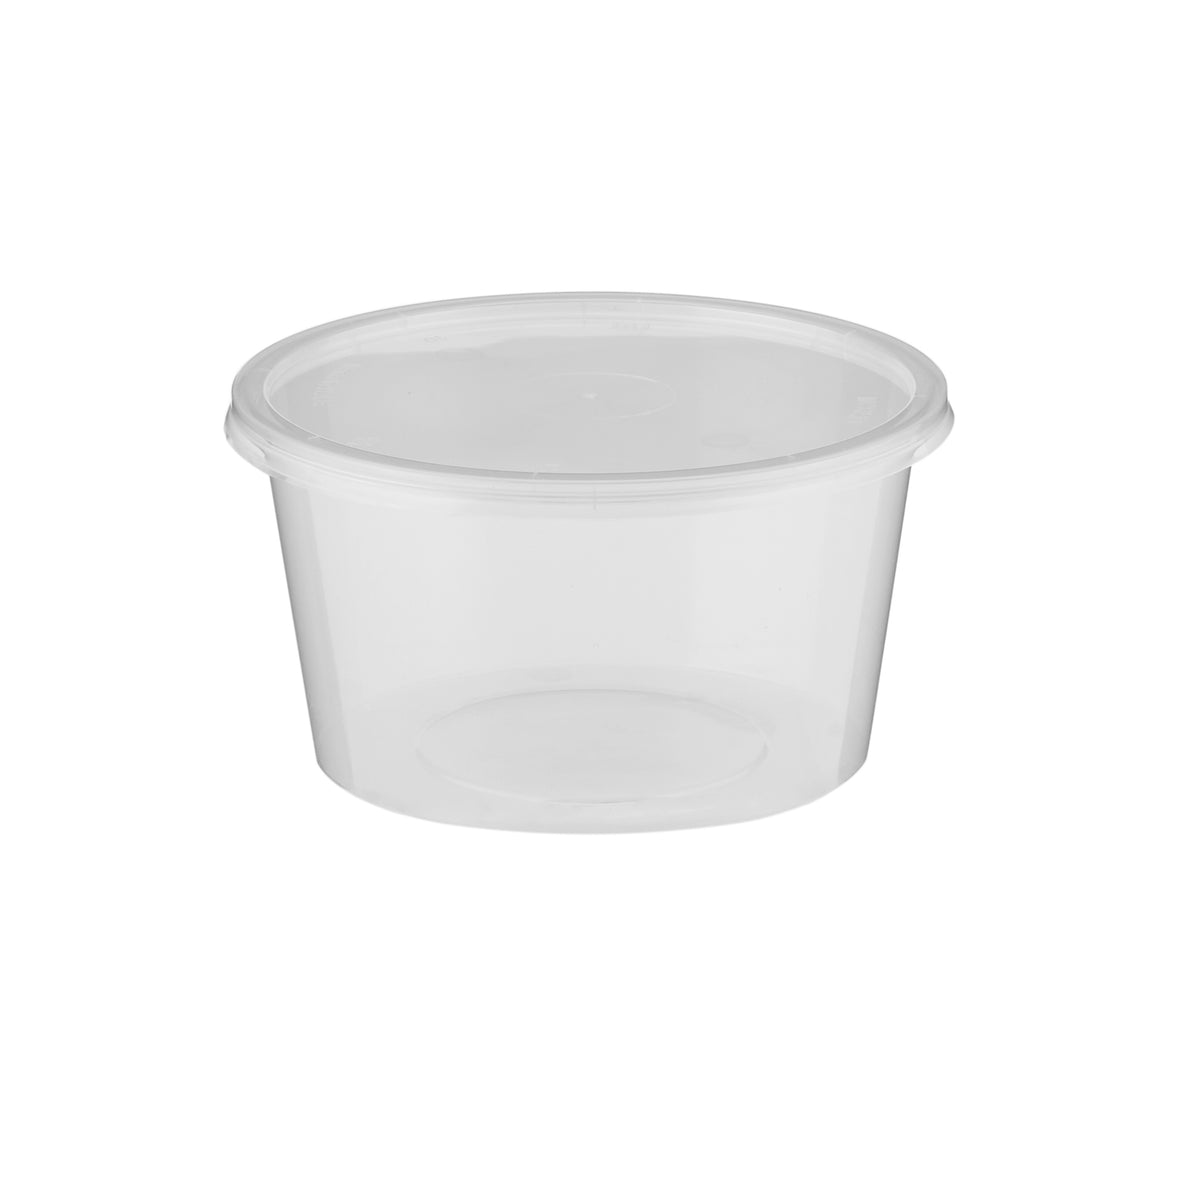 Round Clear Microwavable Container 400ml with lid for gravy or soup - Hotpack Global